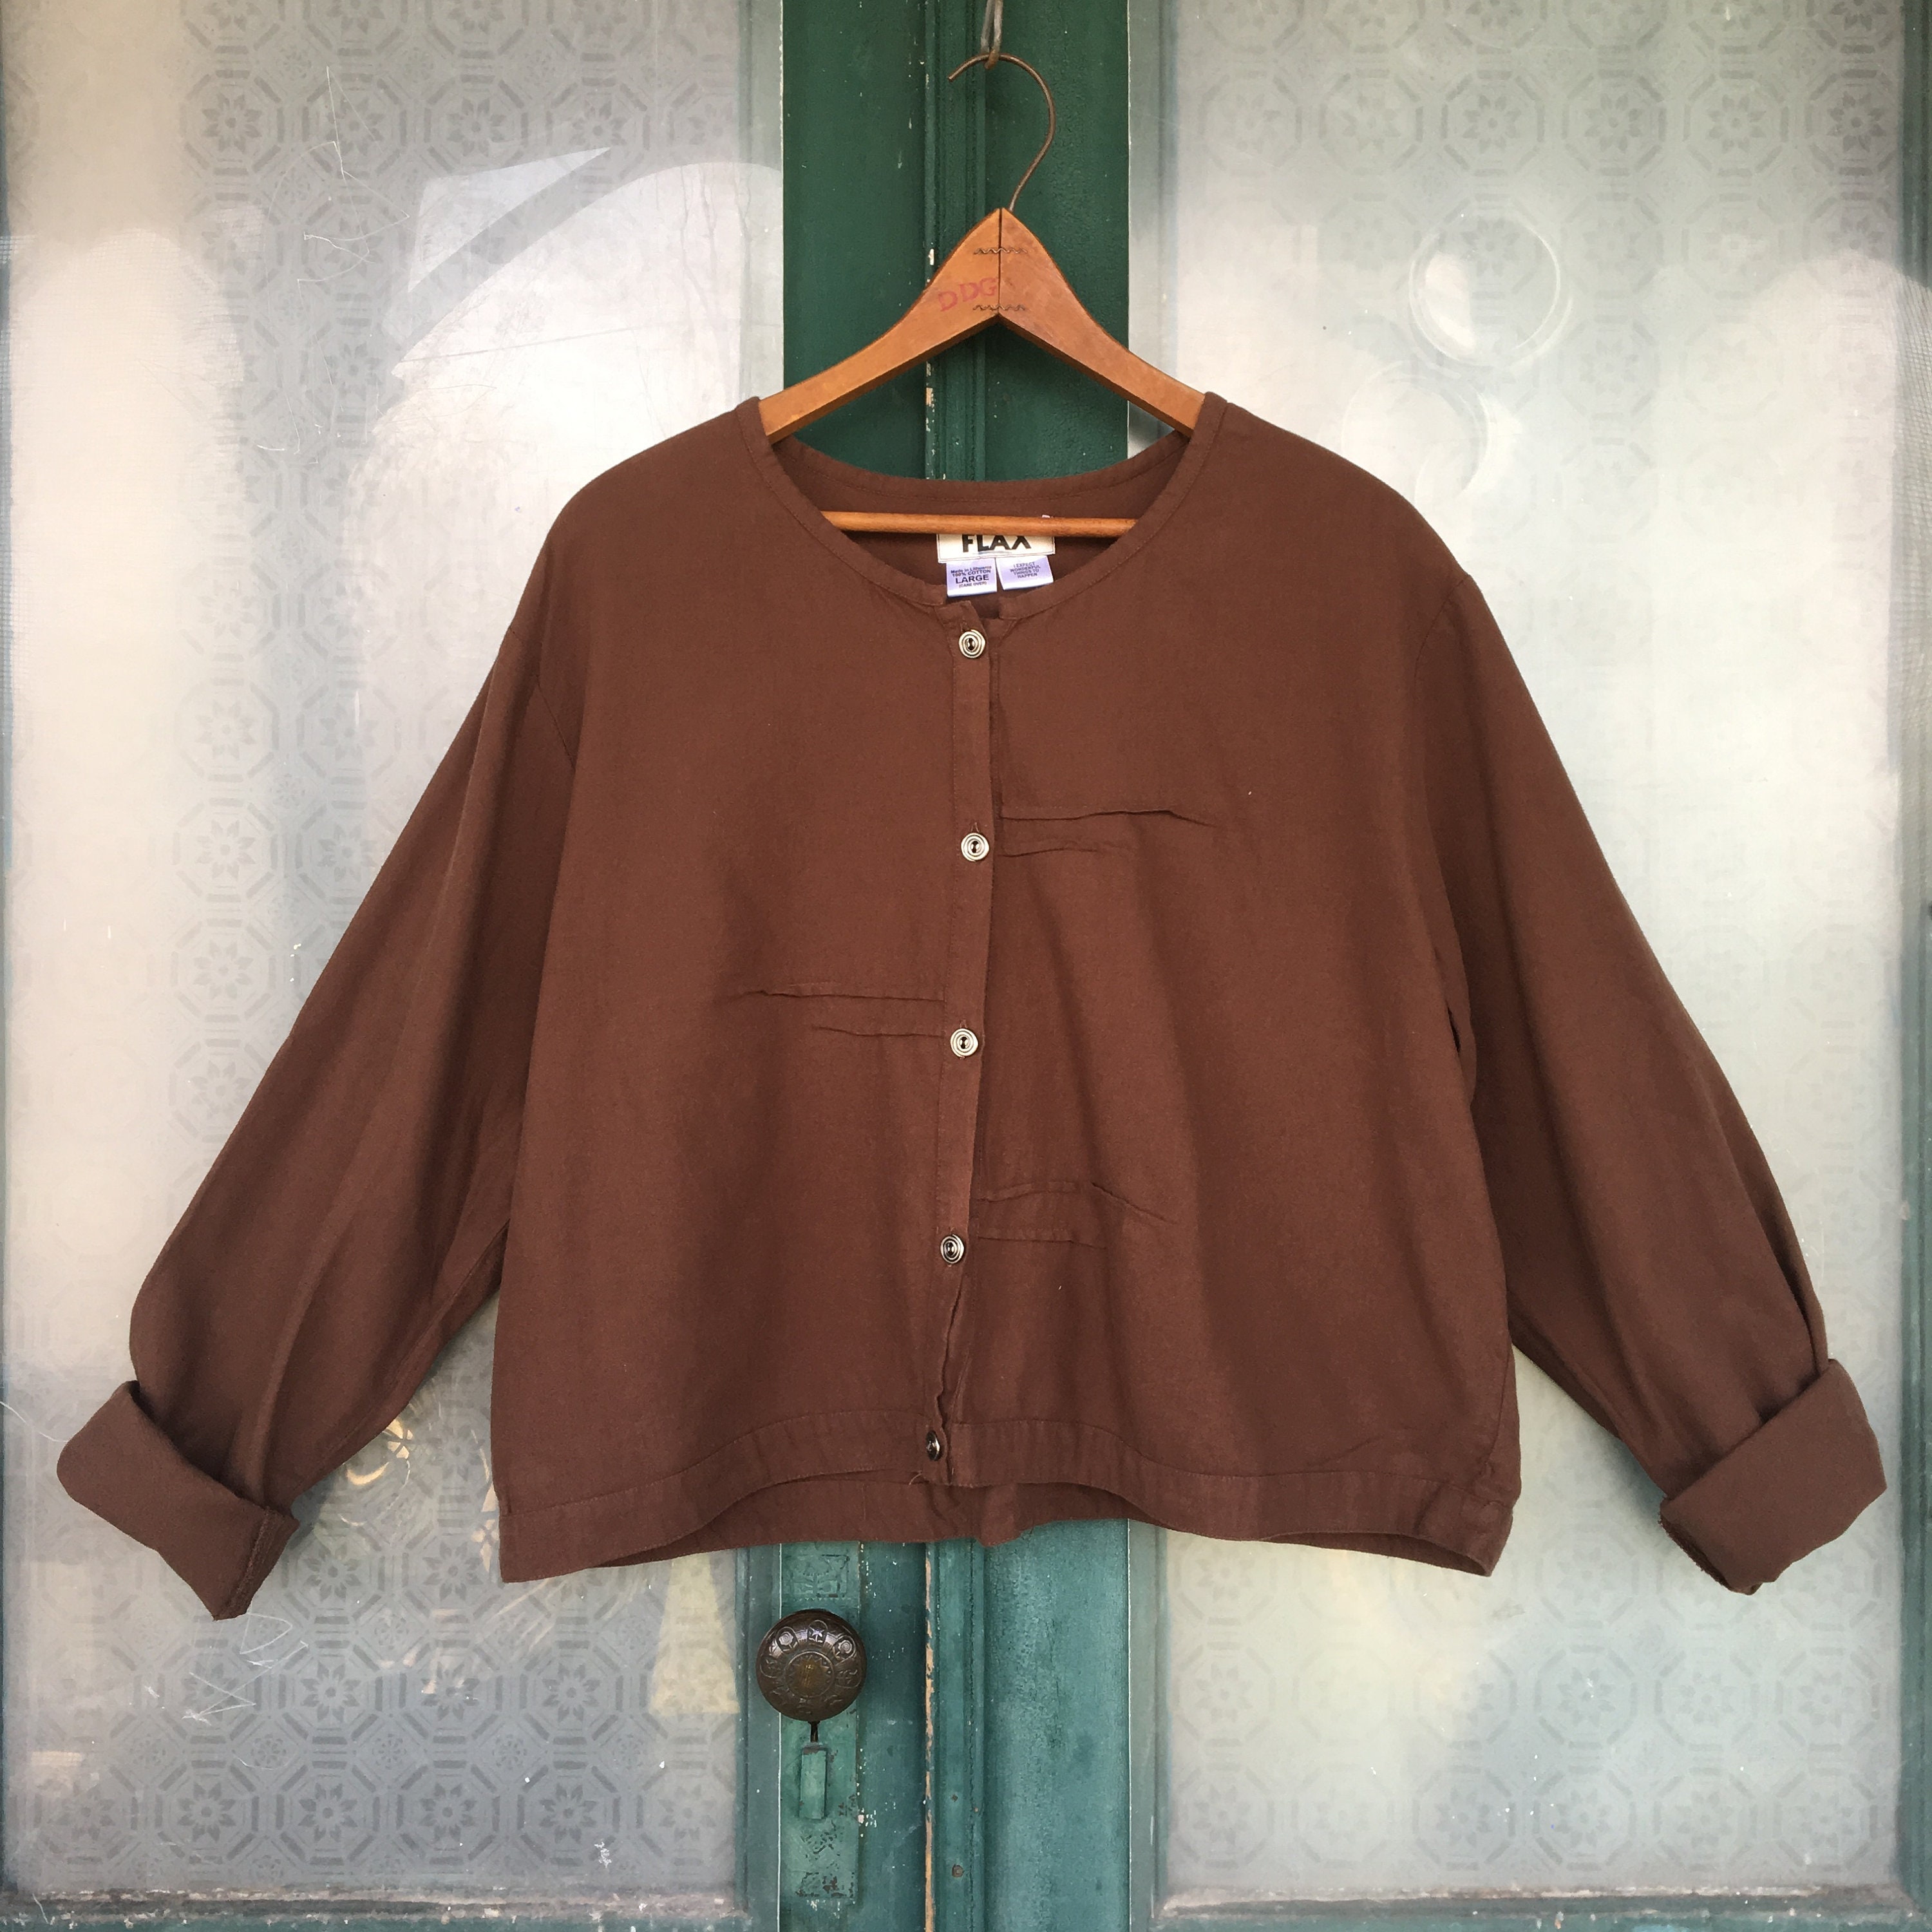 FLAX Cropped Jacket -L- Brown Cotton Flannel